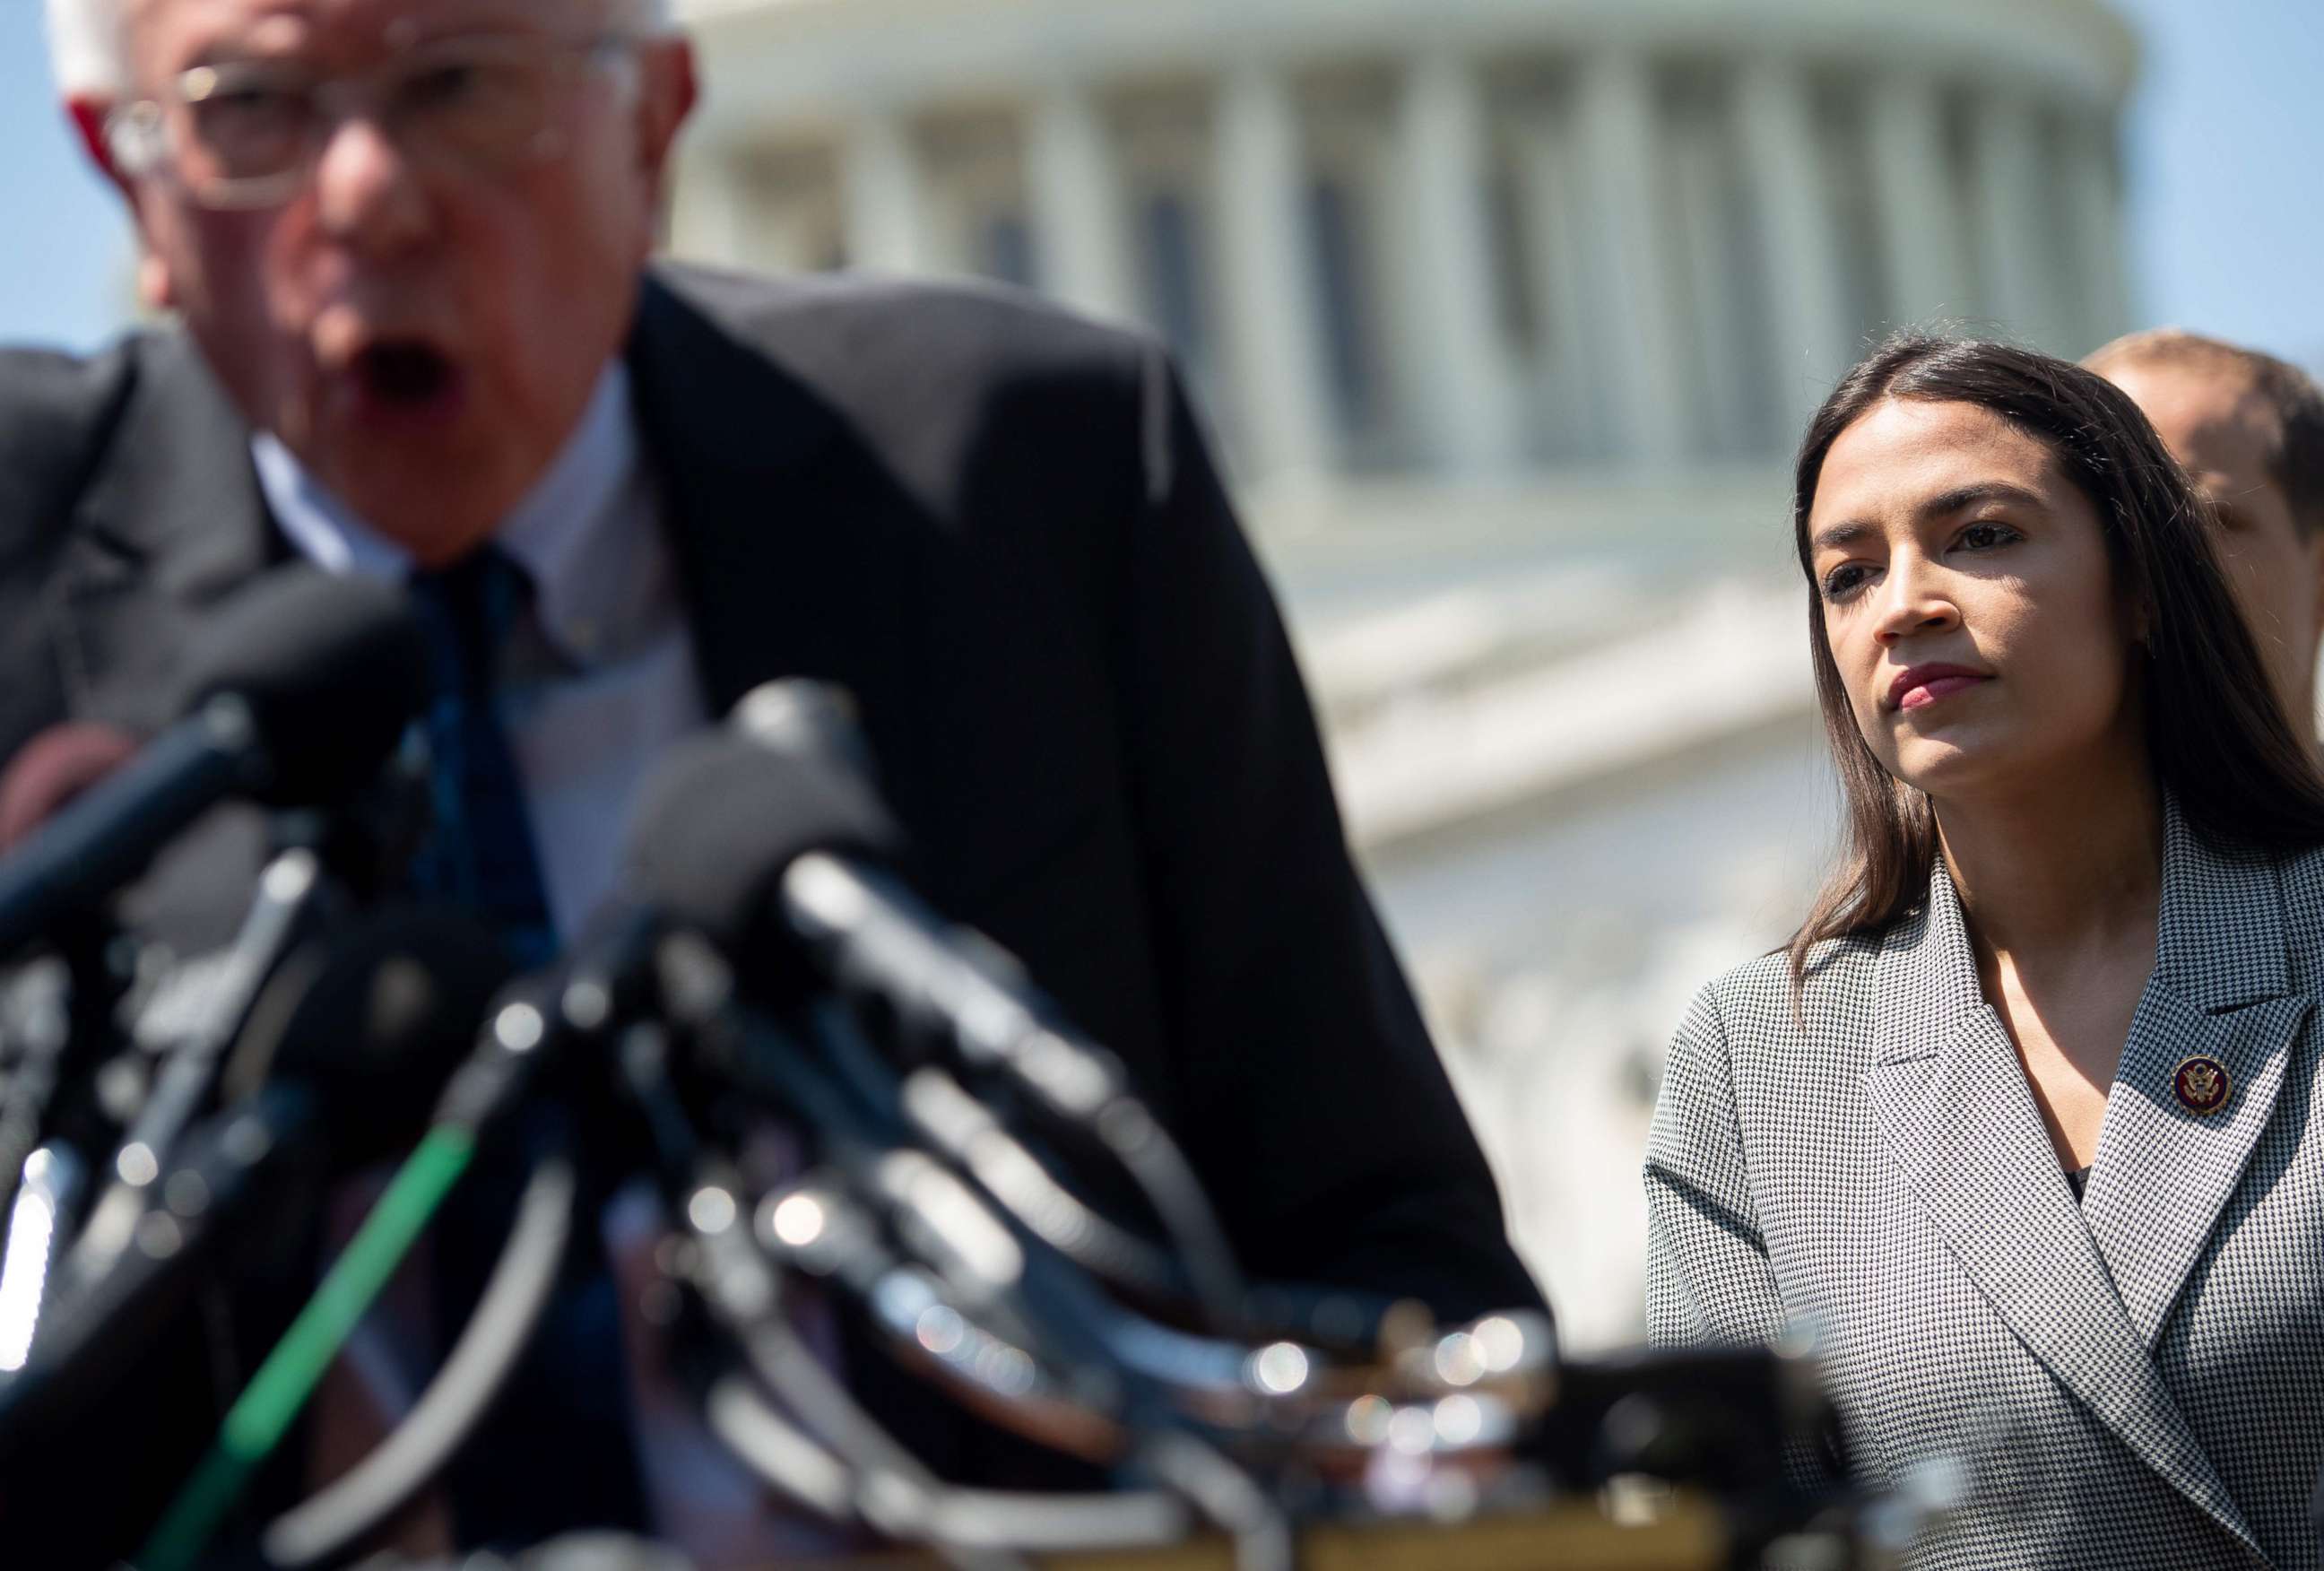 PHOTO: In this file photo taken on June 24, 2019. Sen. Bernie Sanders, I-Vt., speaks alongside Representative Alexandria Ocasio-Cortez, D-N.Y., during a press conference to introduce college affordability legislation outside the U.S. Capitol.